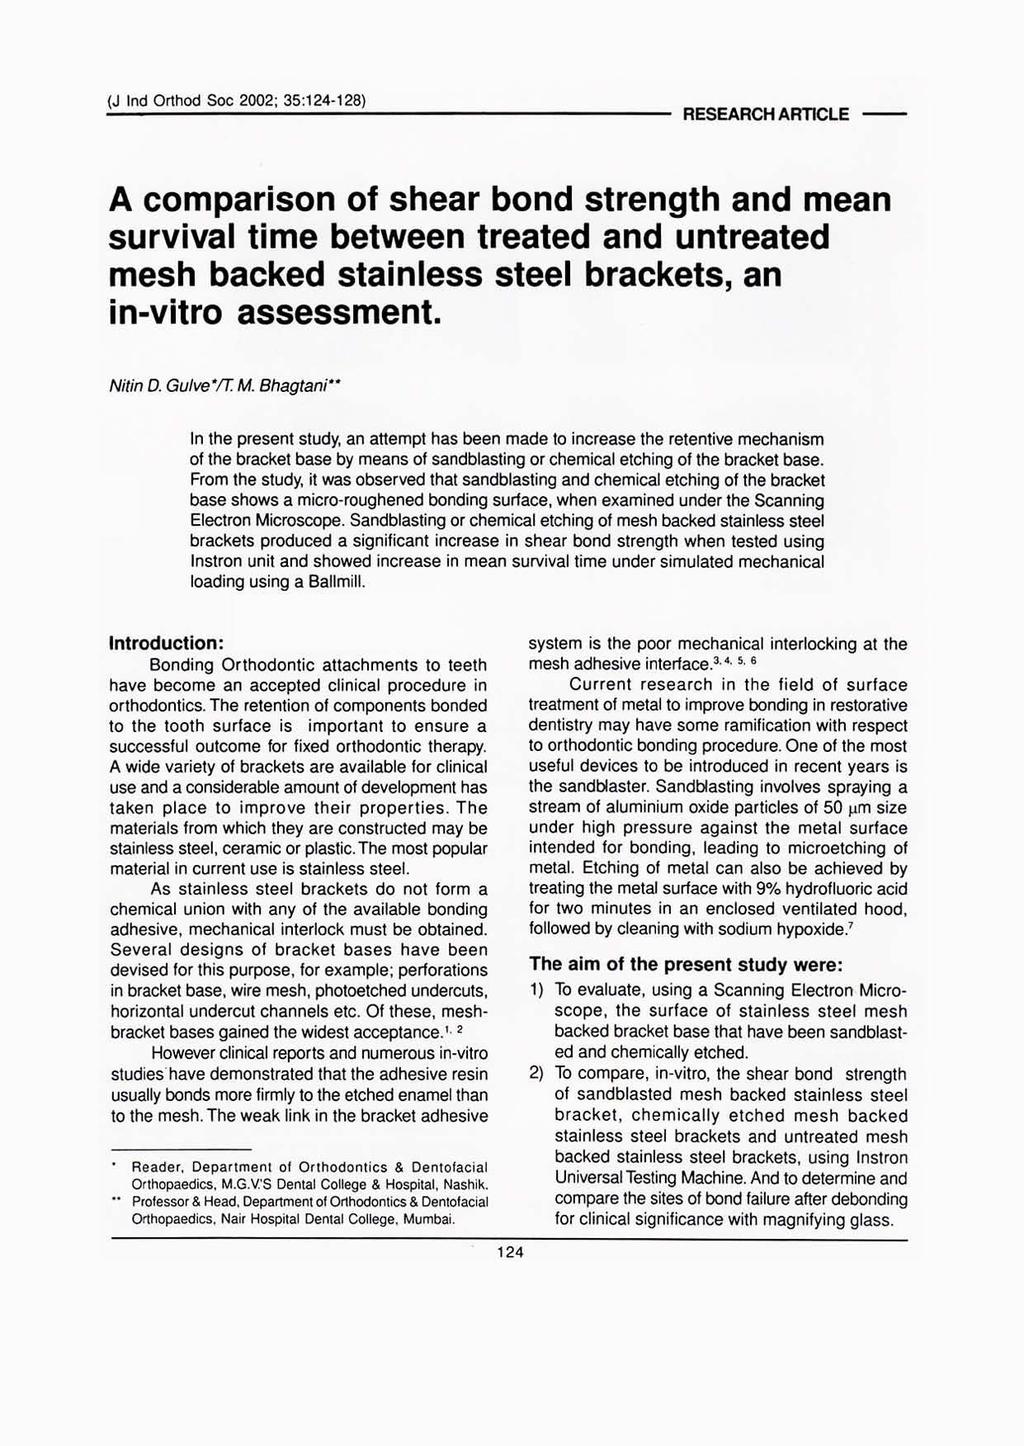 (J lnd Orthod Soc 2002; 35:124 128) RESEARCH ARTICLE - A comparison of shear bond strength and mean survival time between treated and untreated mesh backed stainless steel brackets, an in-vitro